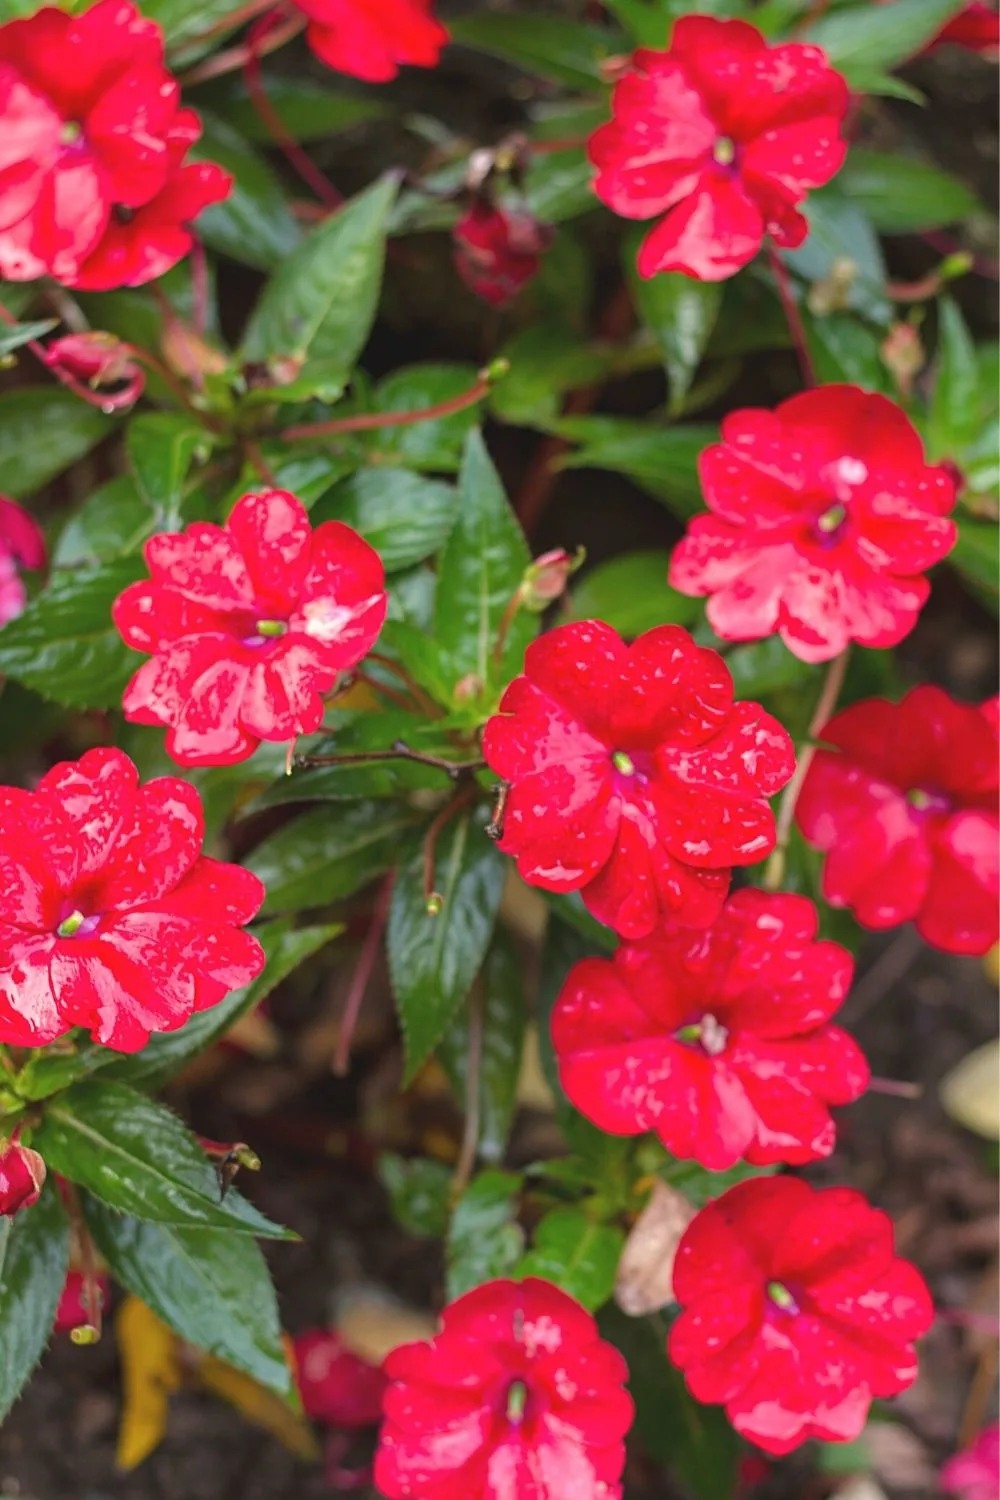 Impatiens walleriana (Impatiens) thrive in both shady and sunlit areas which you can find in a northwest facing garden